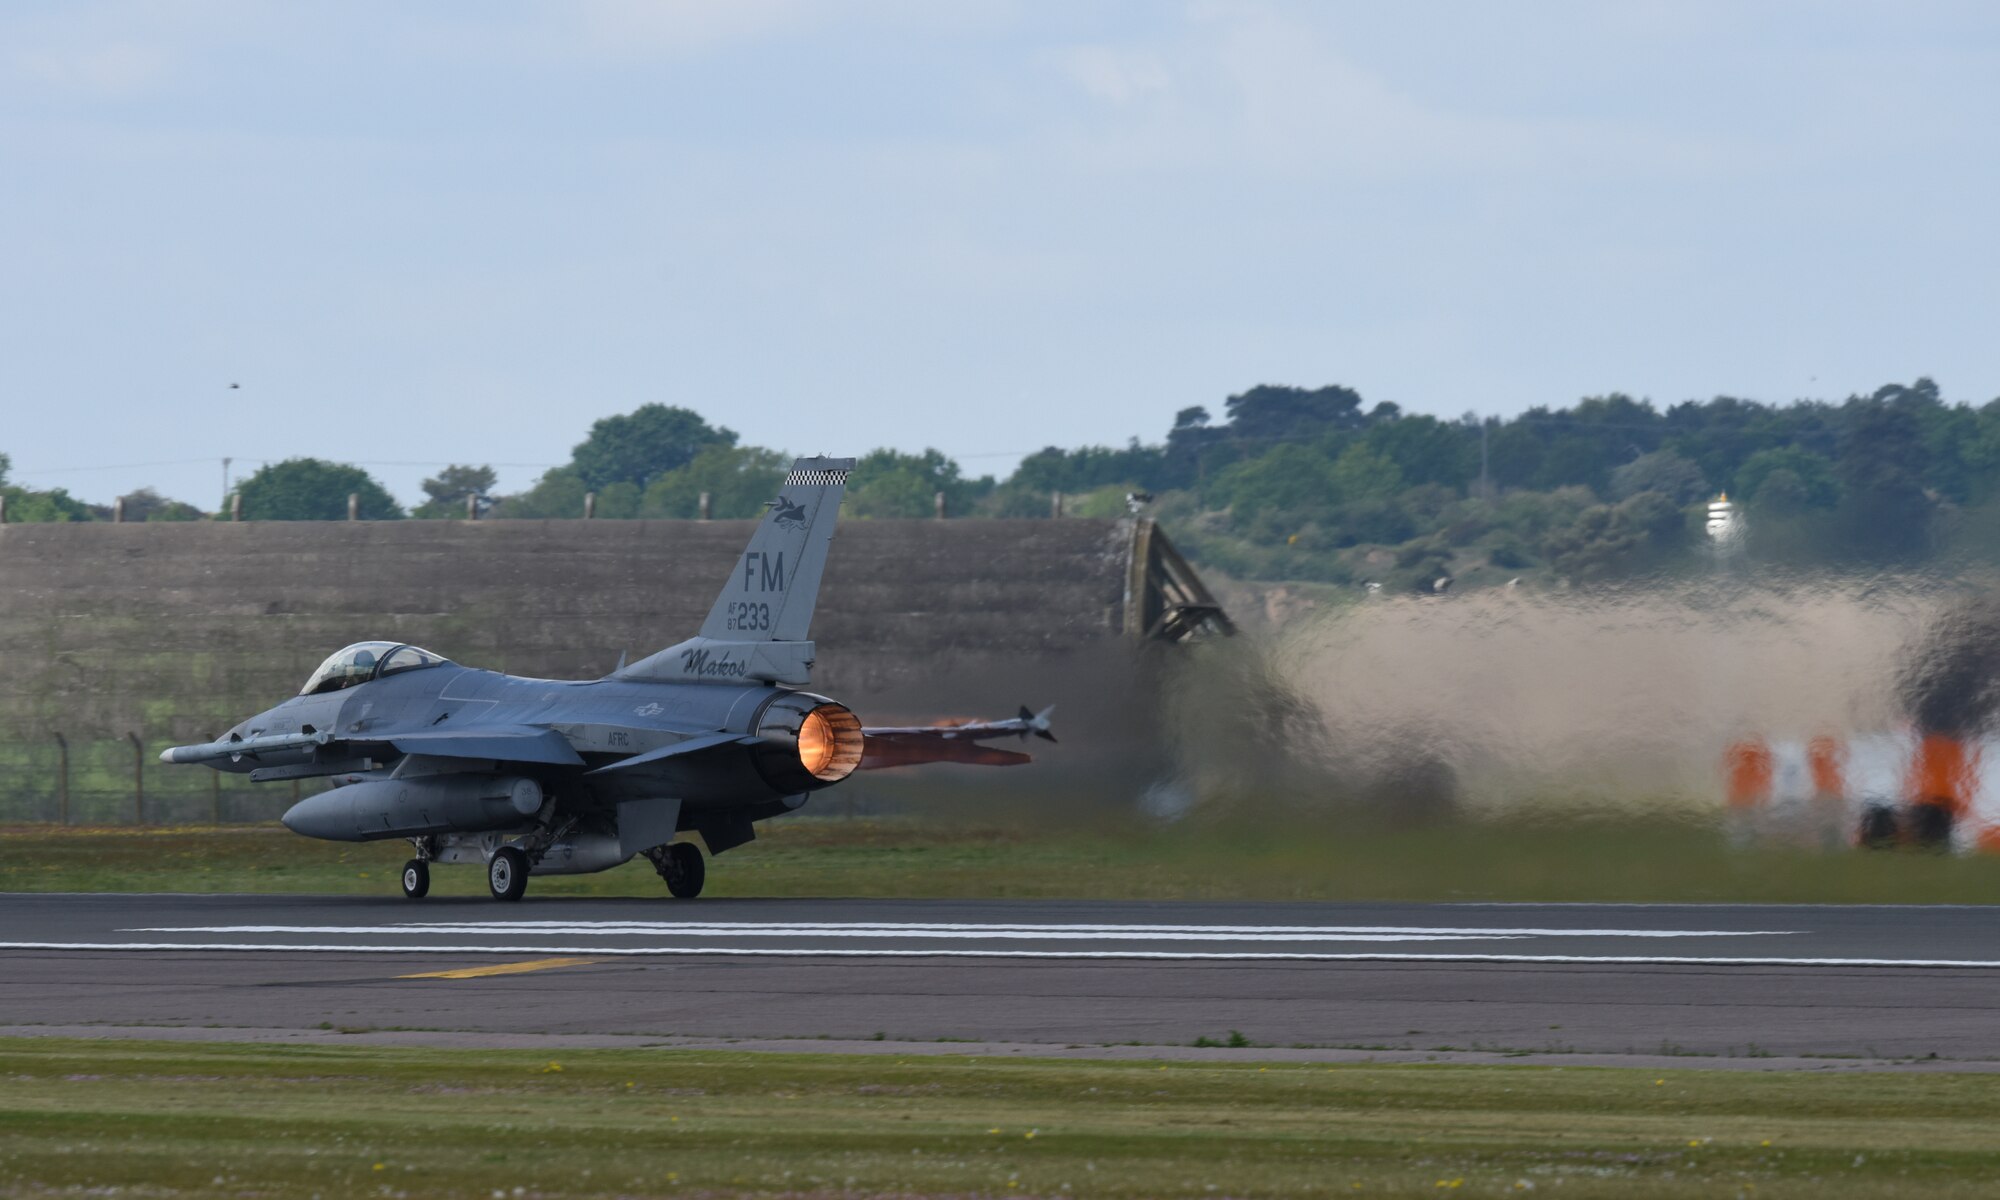 An F-16C Fighting Falcon assigned to the 93rd Fighter Squadron, Homestead Air Reserve Base, Fla., takes off at Royal Air Force Lakenheath, England, May 21, 2019. The unit's deployment to RAF Lakenheath demonstrates the U.S. Air Force's ability to integrate a total force team into U.S. Air Forces in Europe-Air Forces Africa training and operations. (U.S. Air Force photo by Airman 1st Class Madeline Herzog)